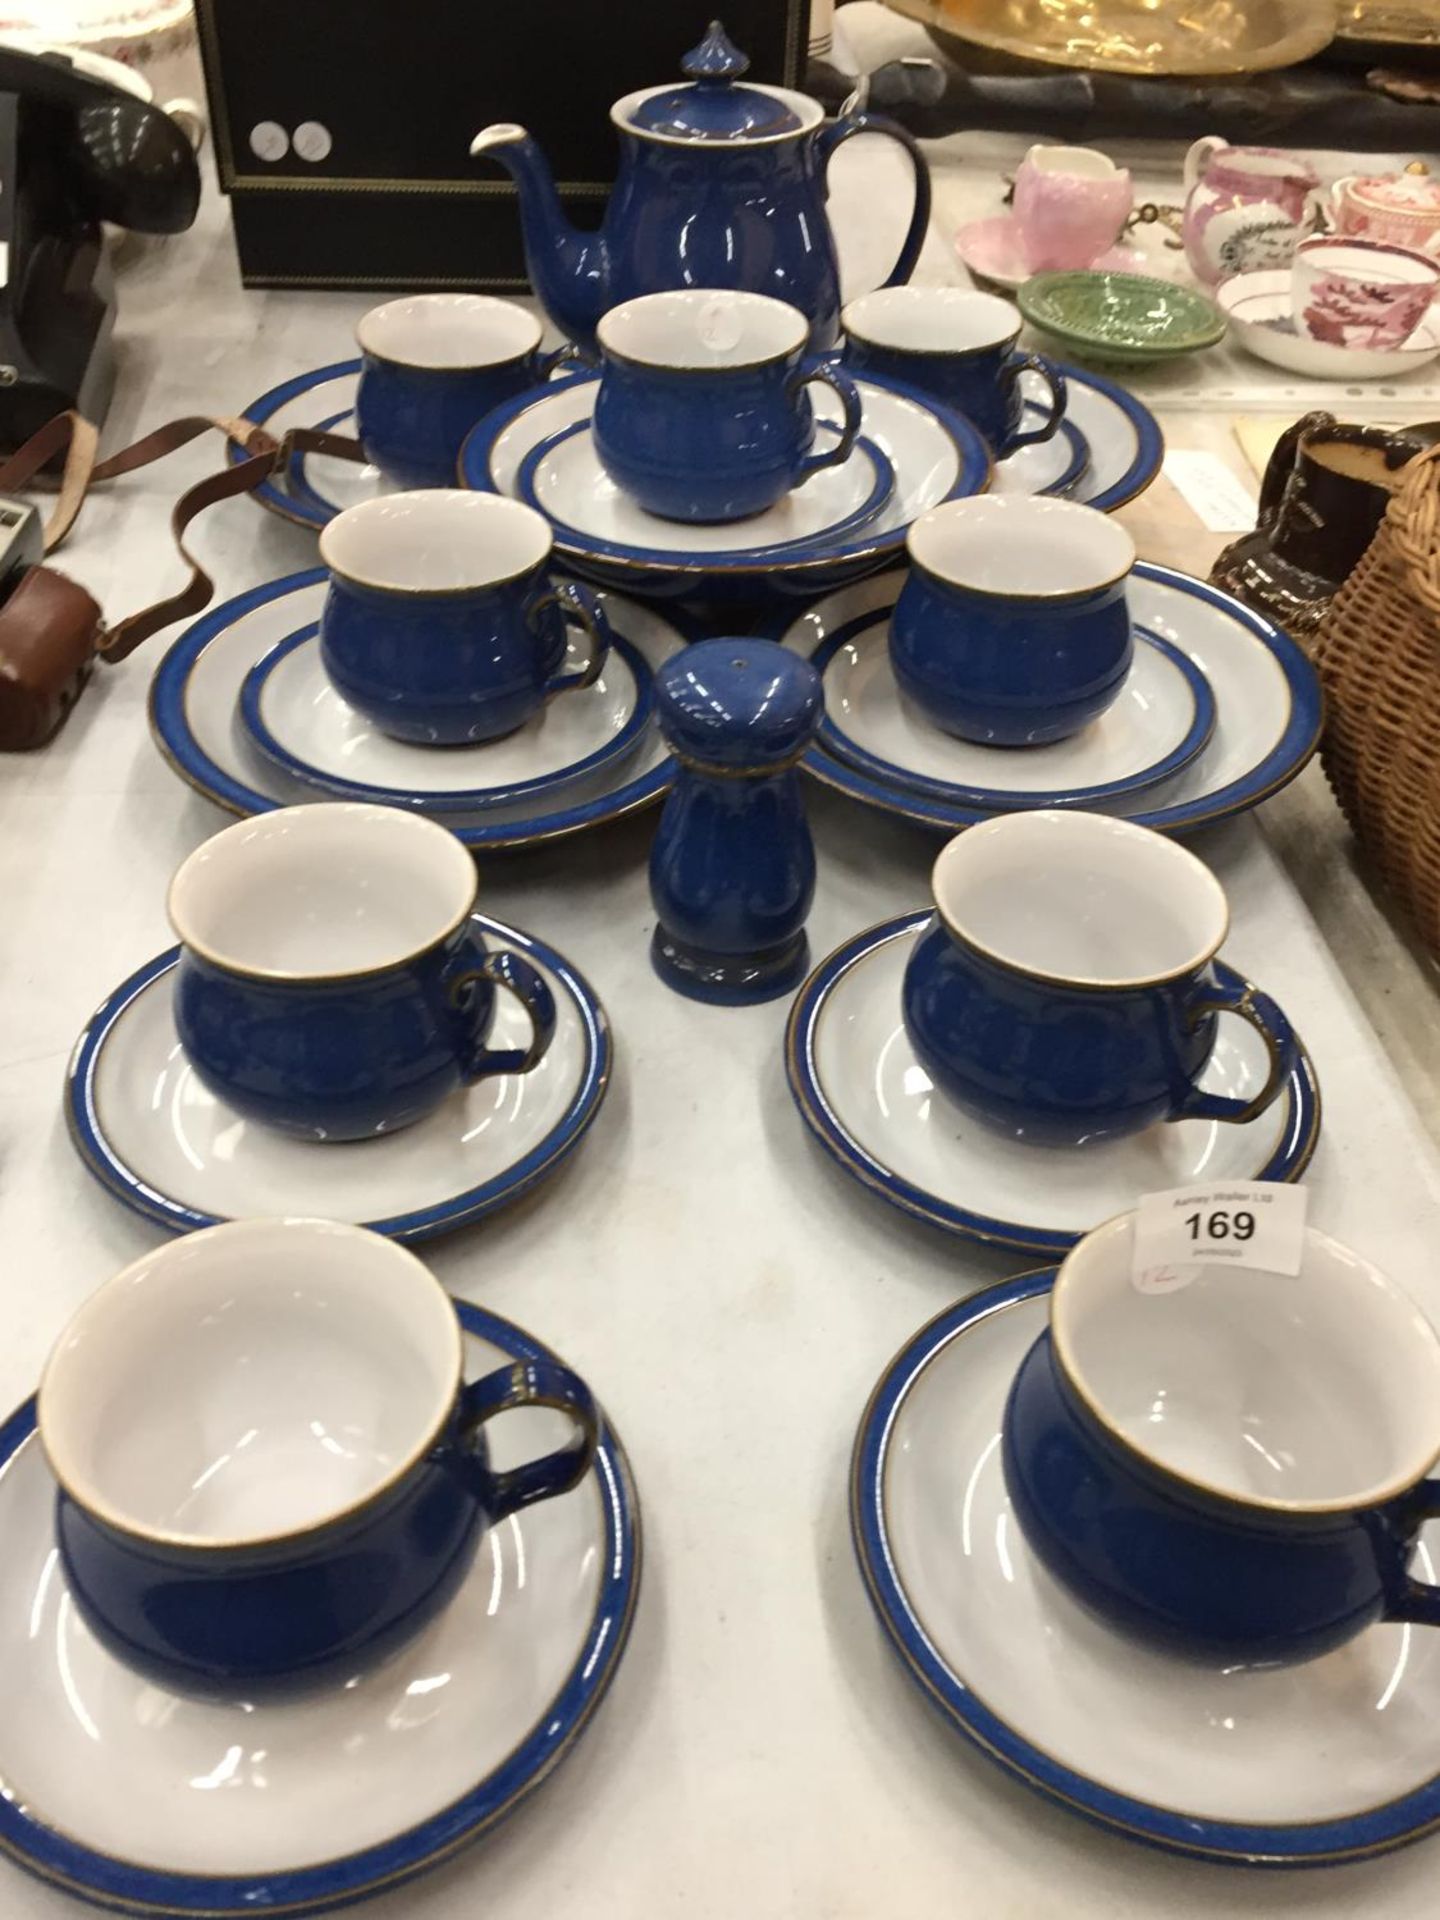 A BLUE DENBY TEASET TO INCLUDE A TEAPOT, BOWLS, CUPS, SAUCERS, ETC - 25 PIECES IN TOTAL - Image 2 of 4